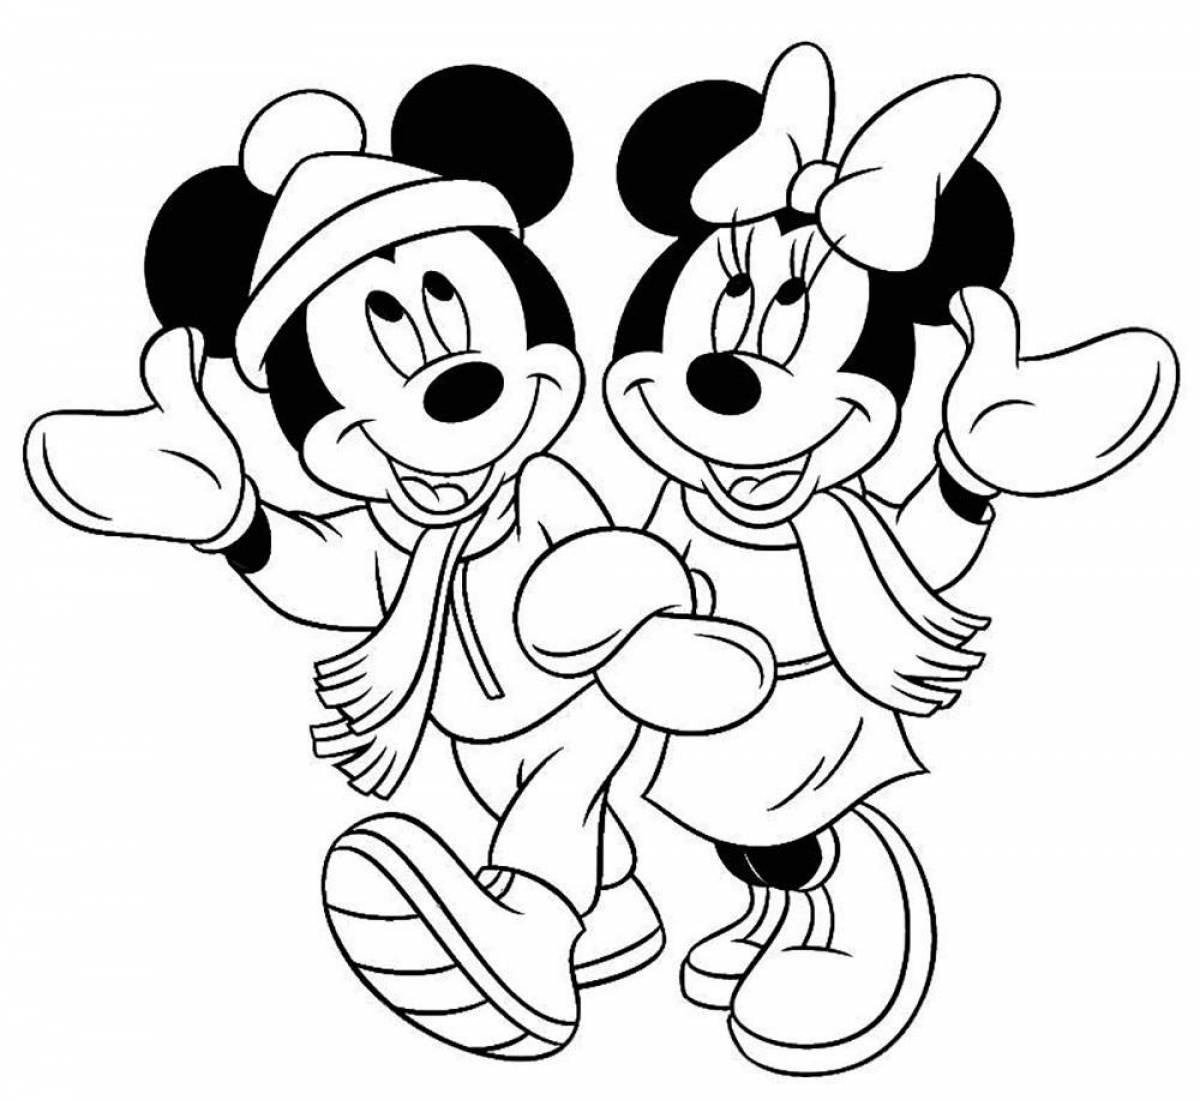 Mickey mouse for girls #3